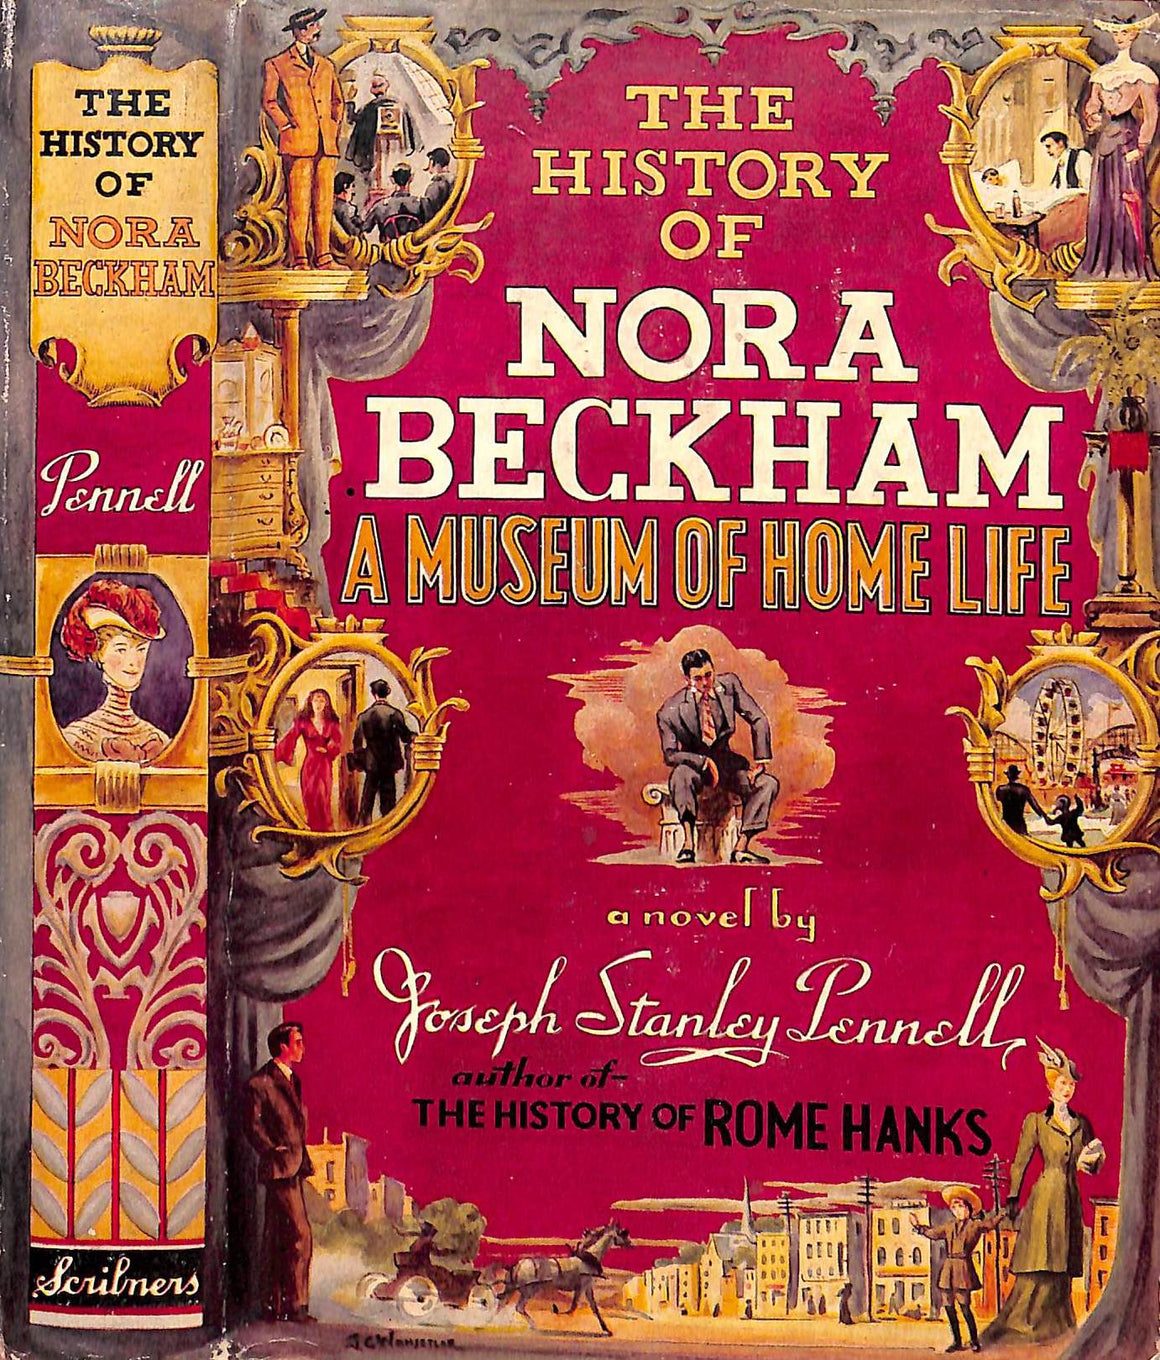 "The History Of Nora Beckham: A Museum Of Home Life" 1948 PENNELL, Joseph Stanley